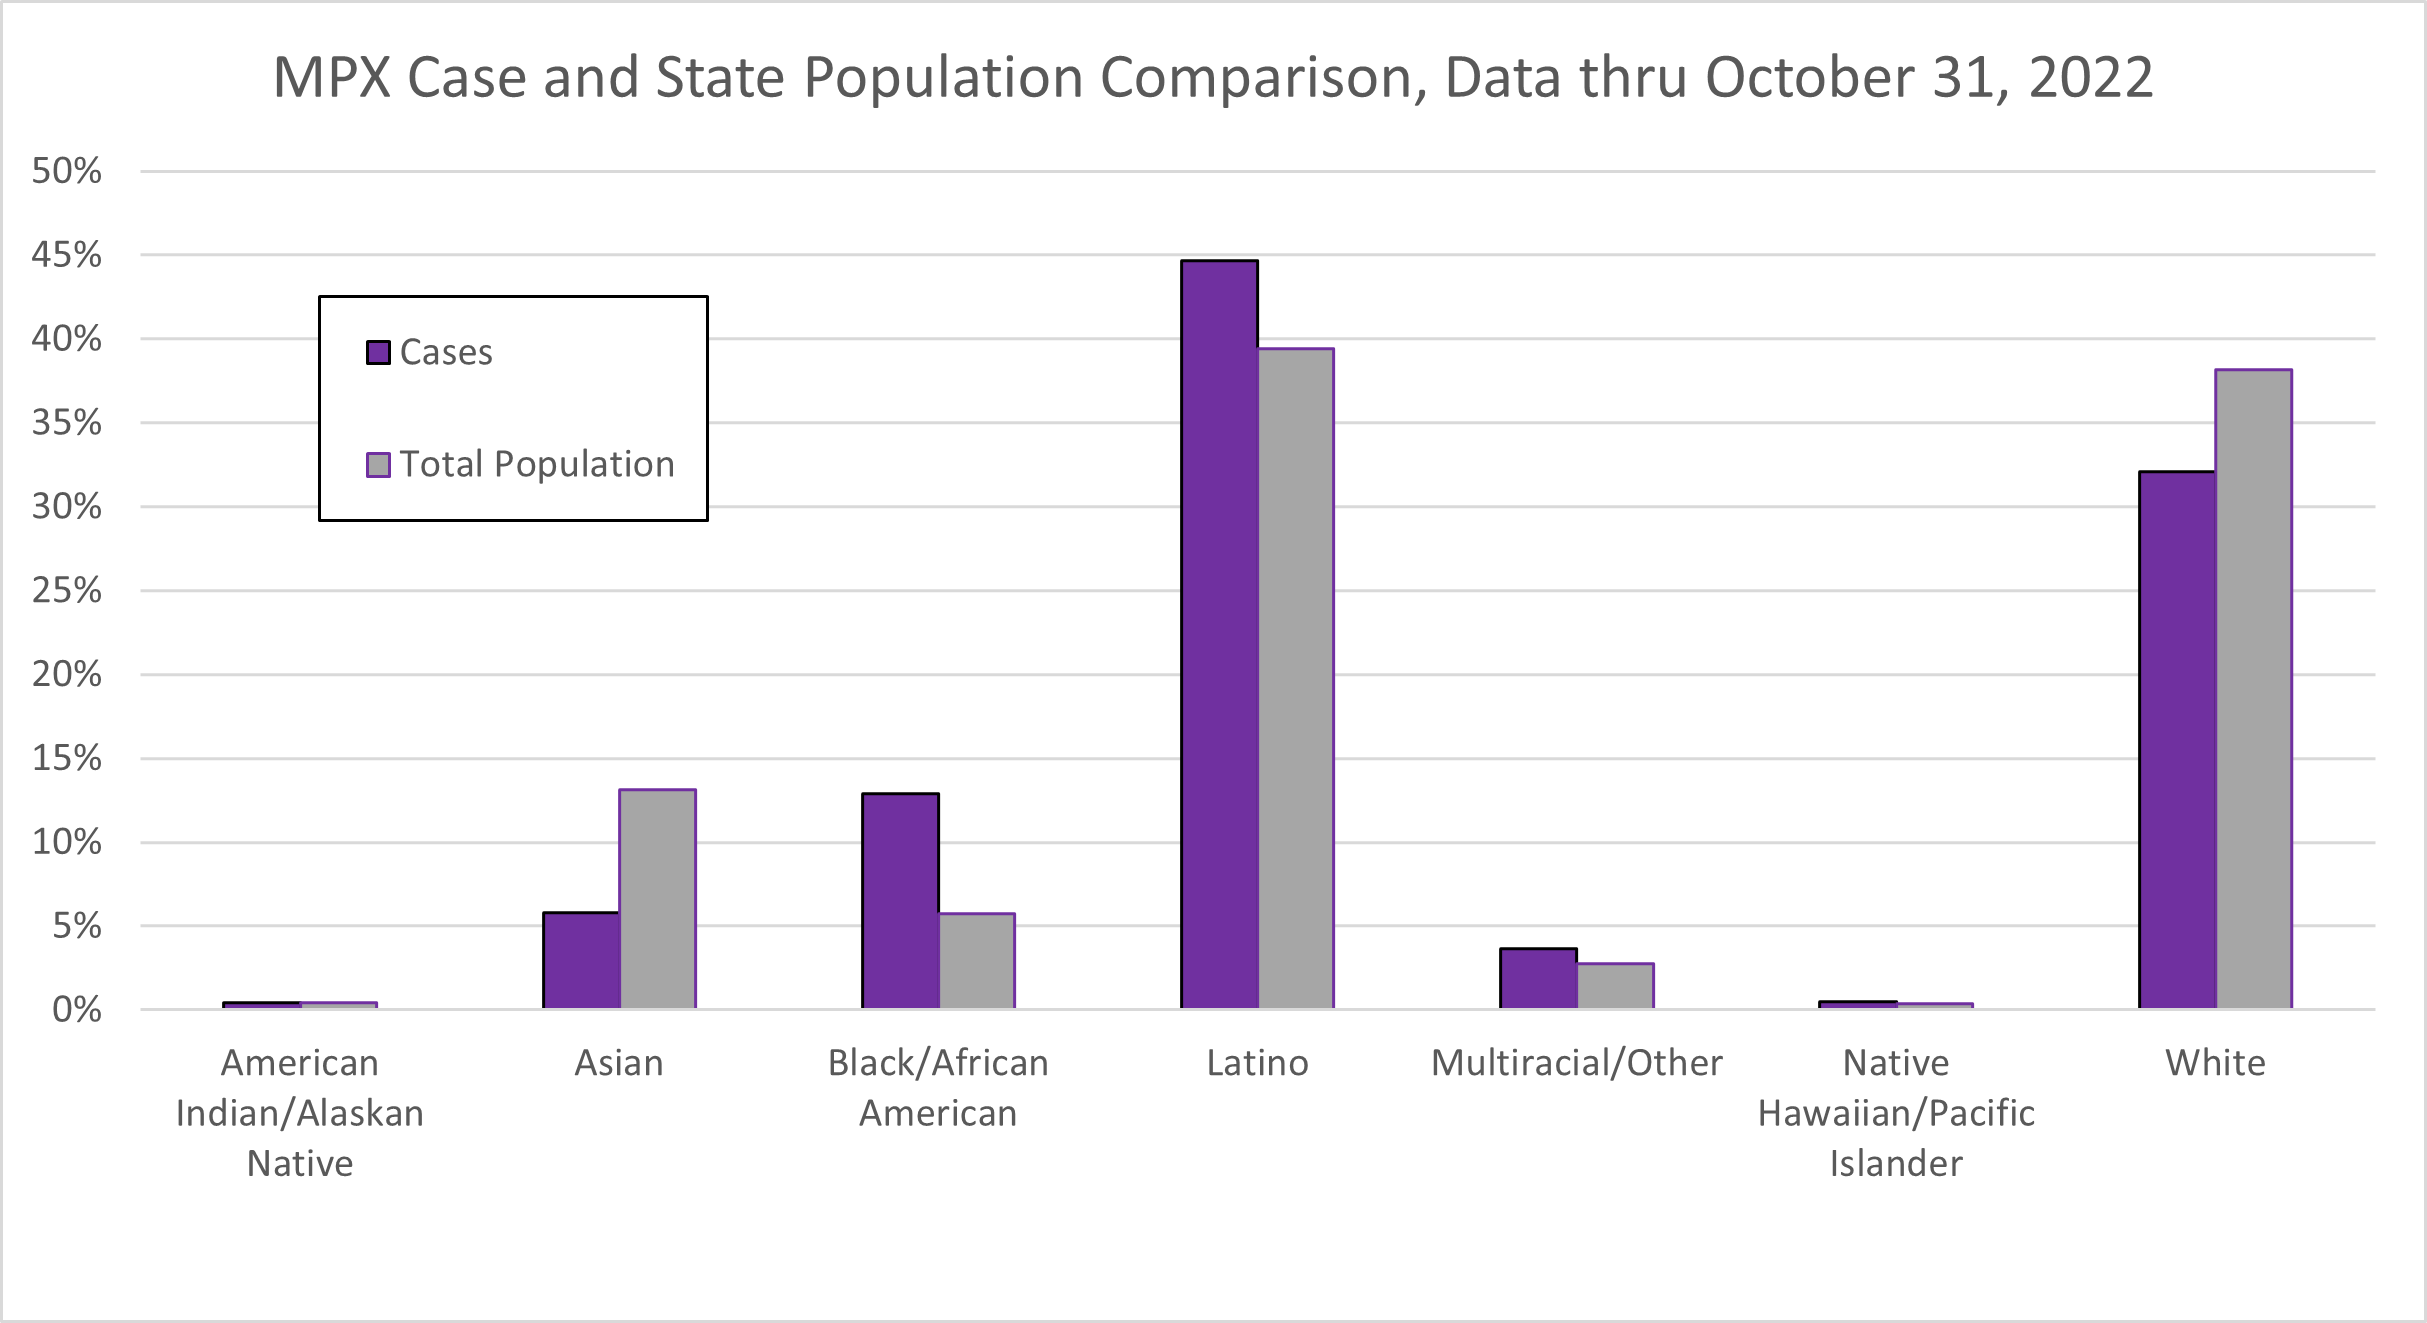 Equity%20MPX%20Case%20and%20State%20Population%20Comparison_11.15.22